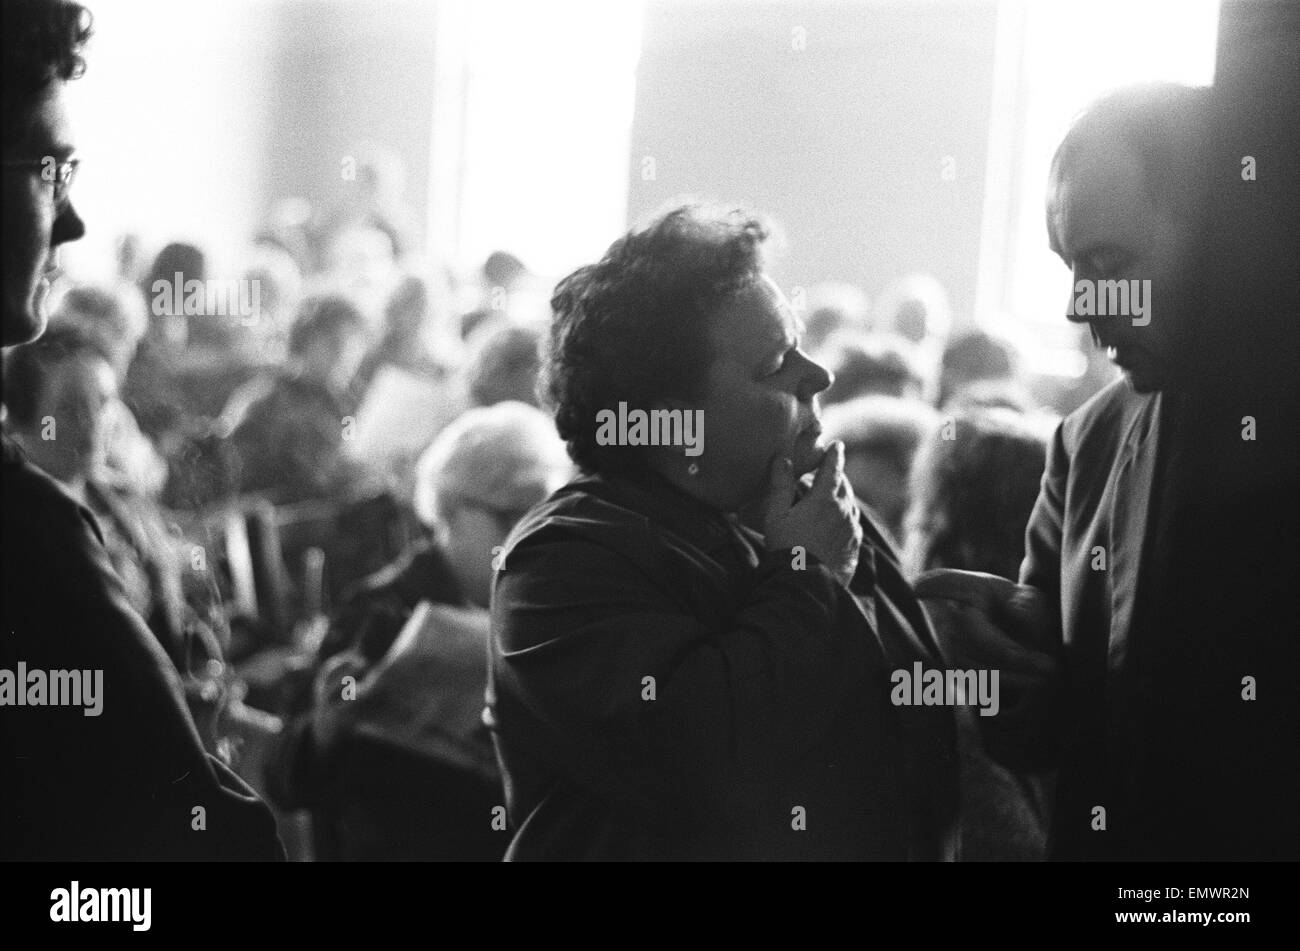 Rose Boland, one of the prominent women involved in the 1968 sewing machinists' strike at the Ford Motor Company seen here at a Union meeting shortly after the end of the dispute. 20th September 1968 Stock Photo